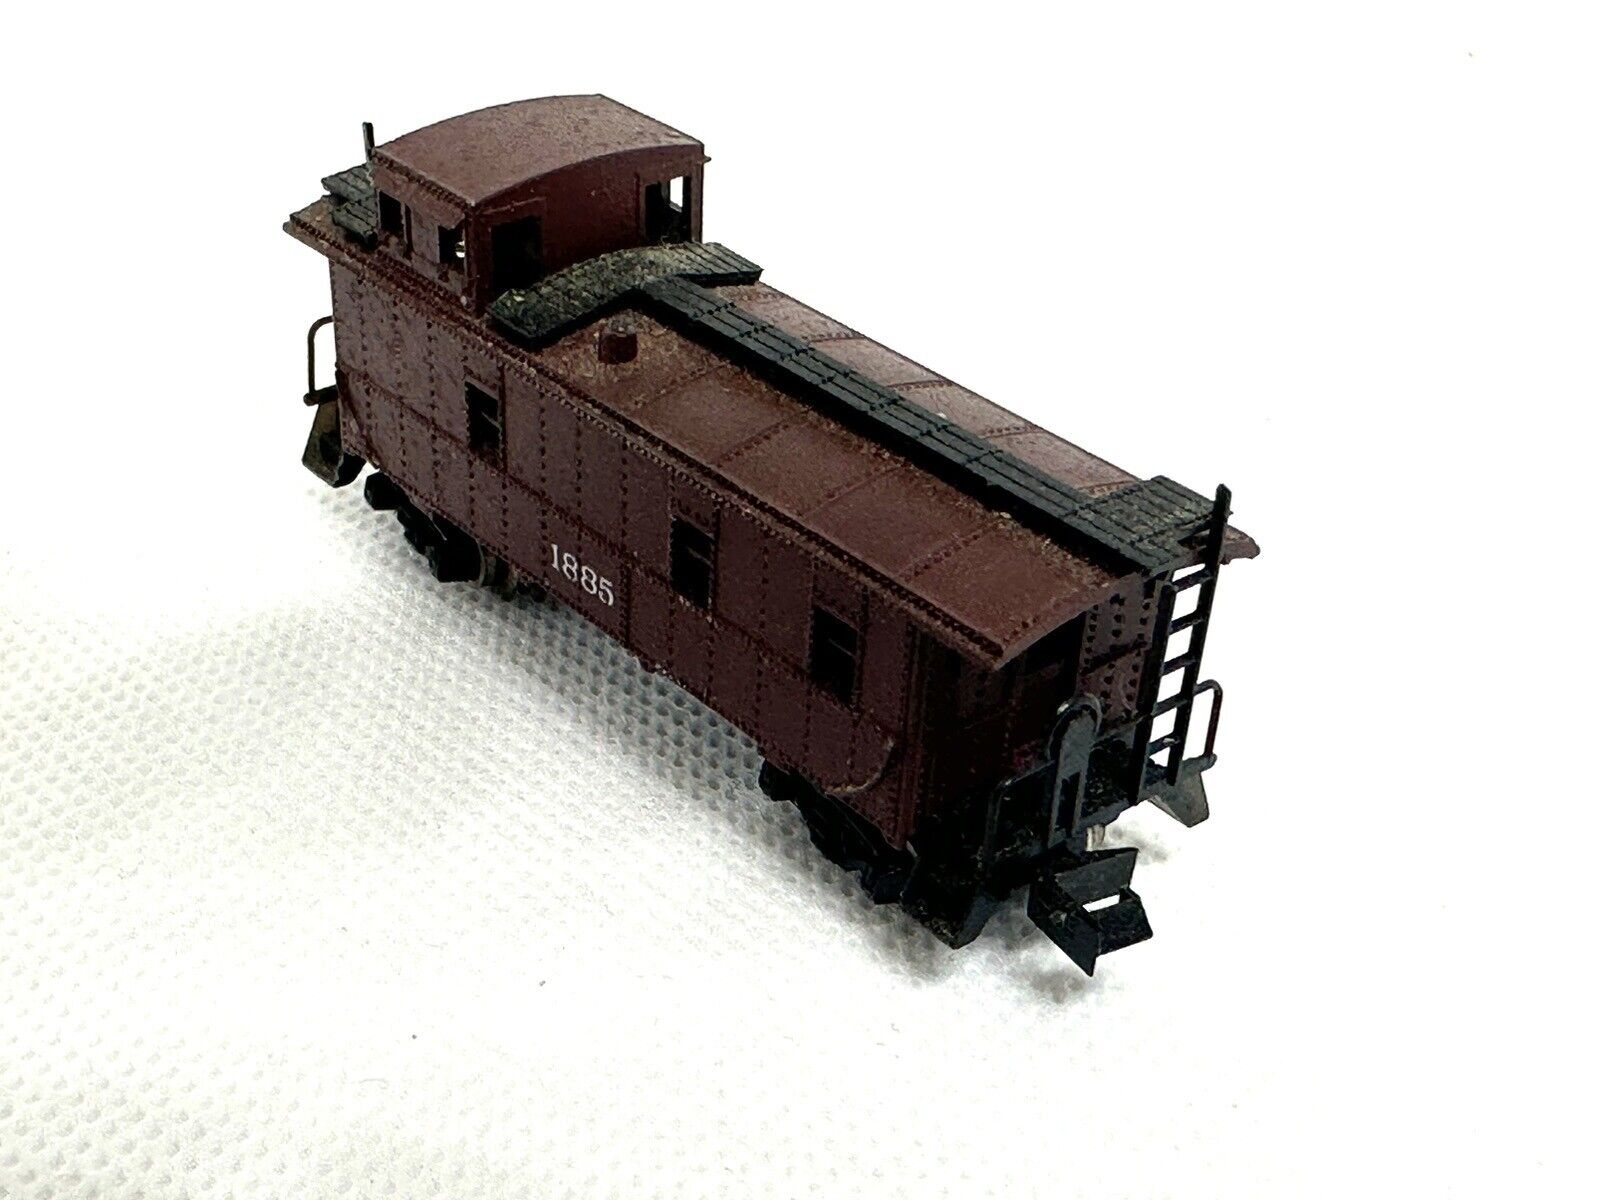 N Scale Atlas 2274 Undecorated Transfer Caboose 1885 N769 for sale